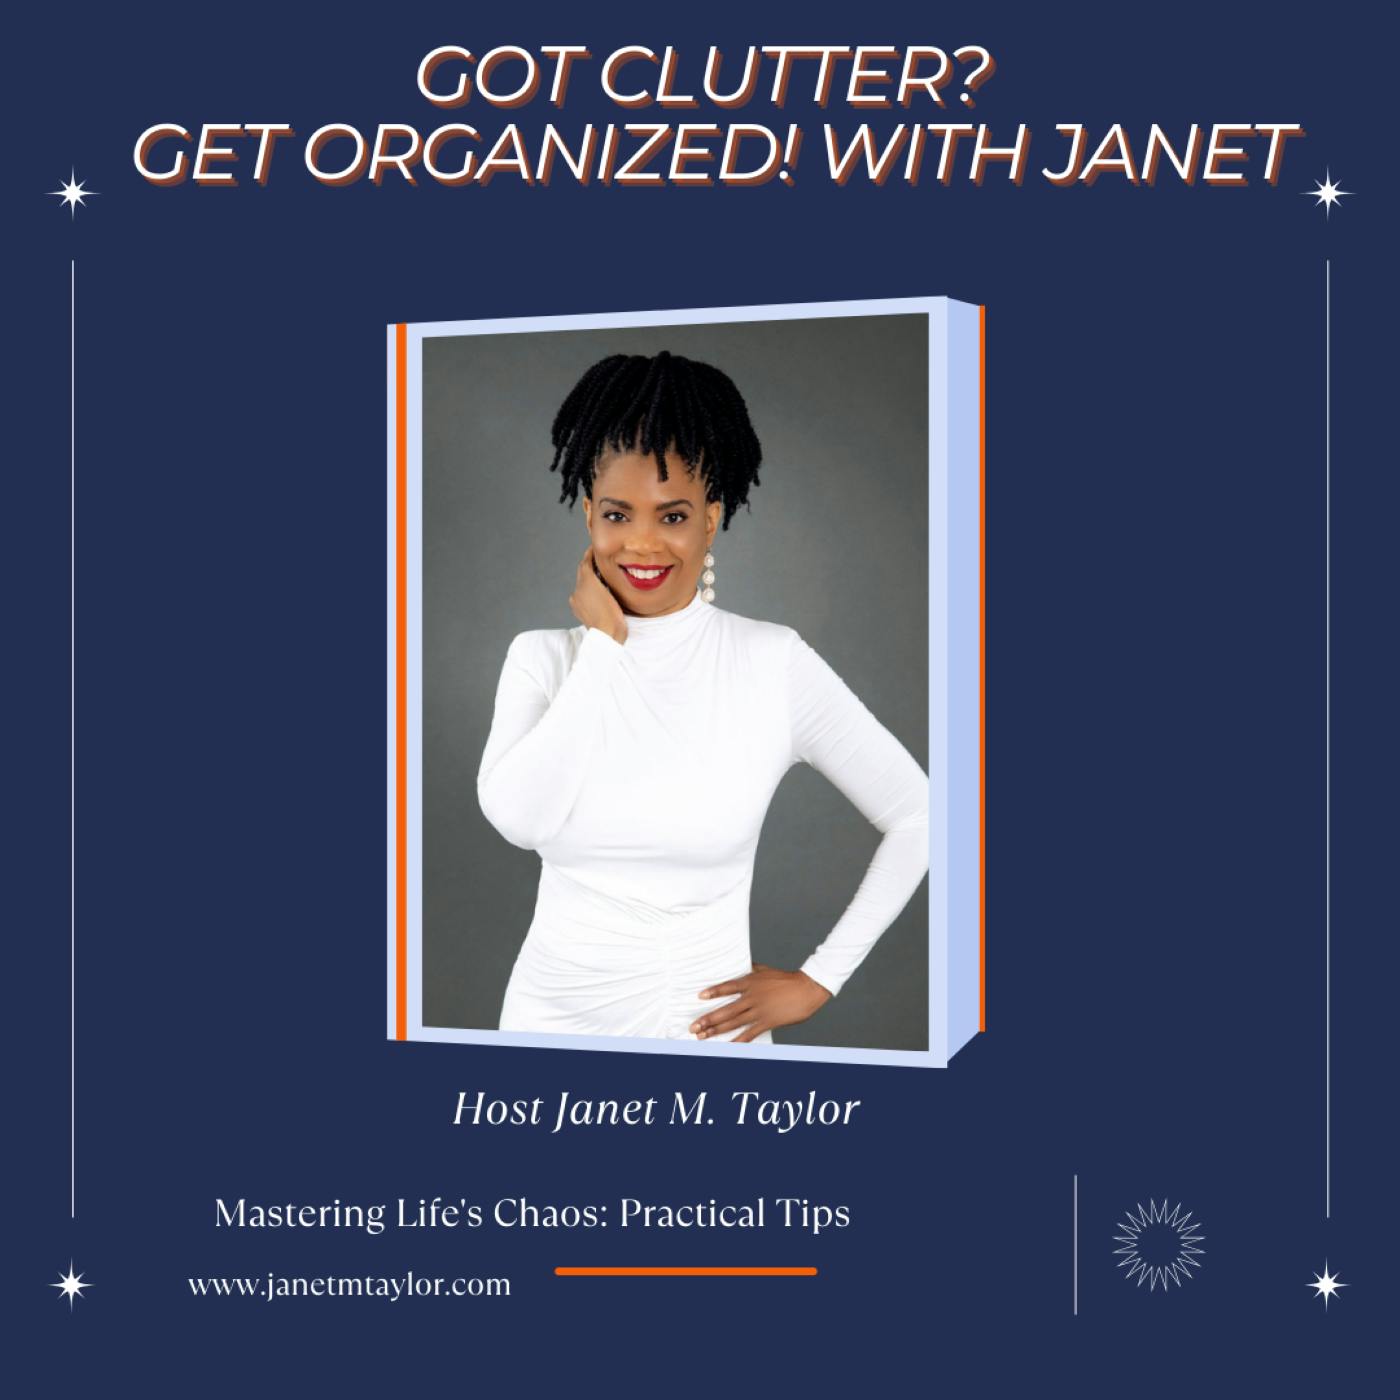 Mastering Life’s Chaos: Practical Tips from Janet